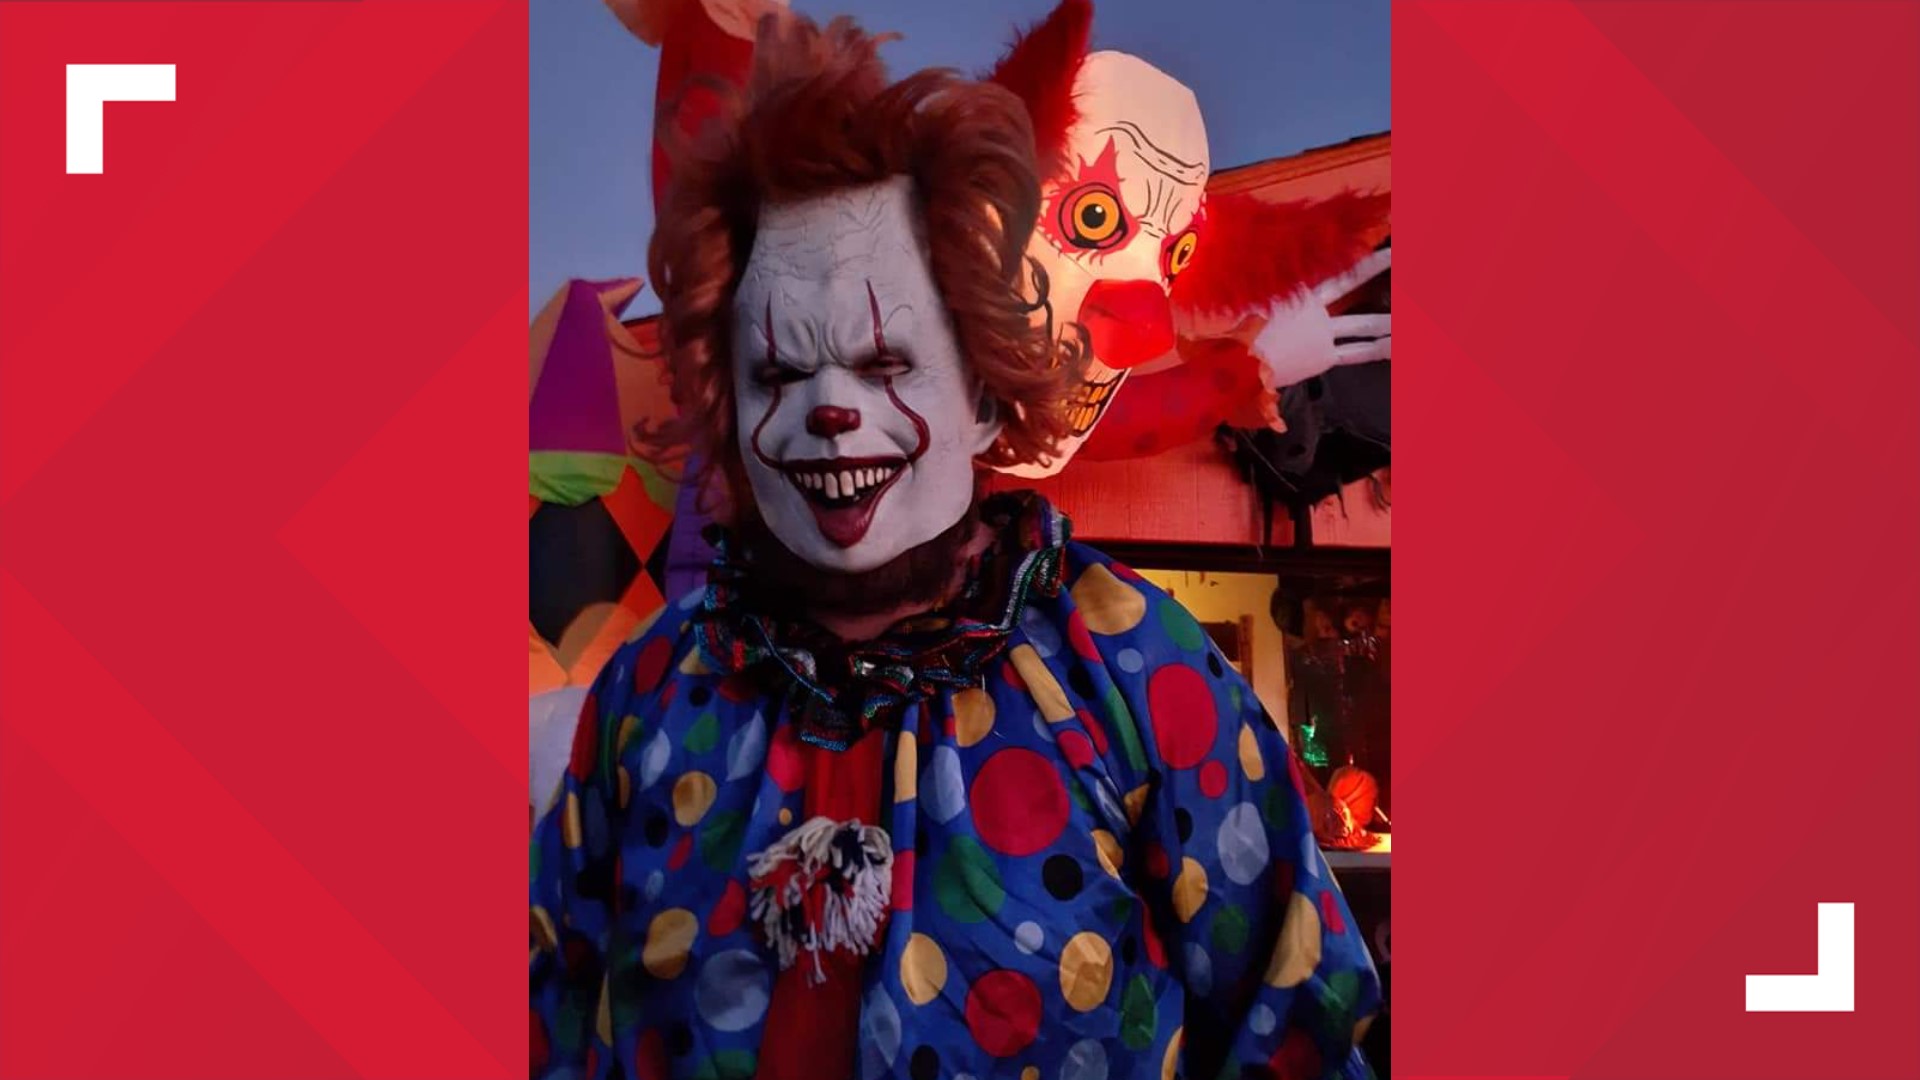 Brian and Shelly Ridgell have been scaring kids at their Midland home for 29 years, and the main attraction is their 7 foot tall son who dresses like a clown.